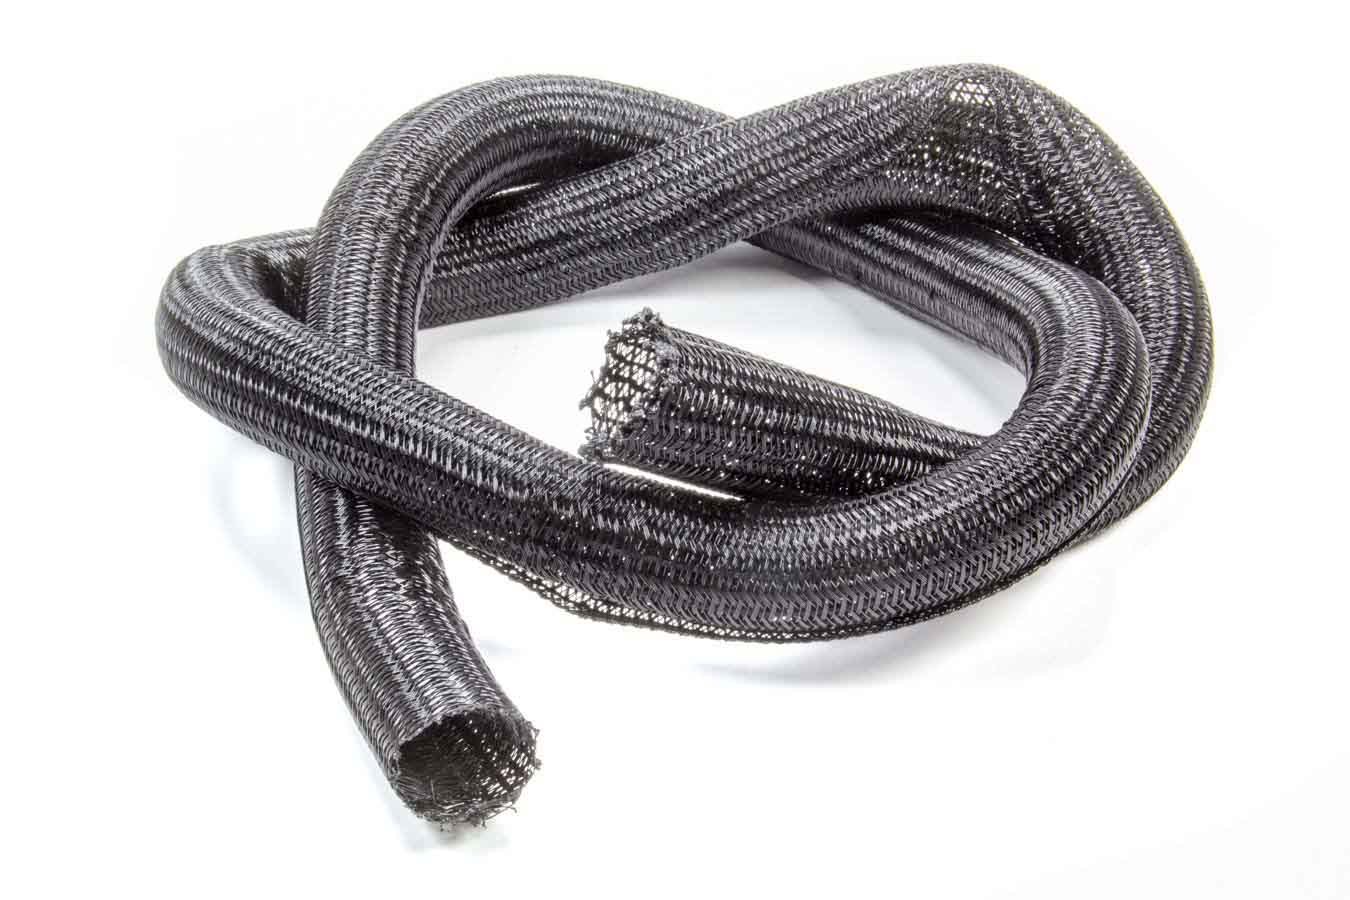 Vibrant Performance 25806 Hose and Wire Sleeve, 1-1/2 in Diameter, Split, 5 ft, Braided Plastic, Black, Each